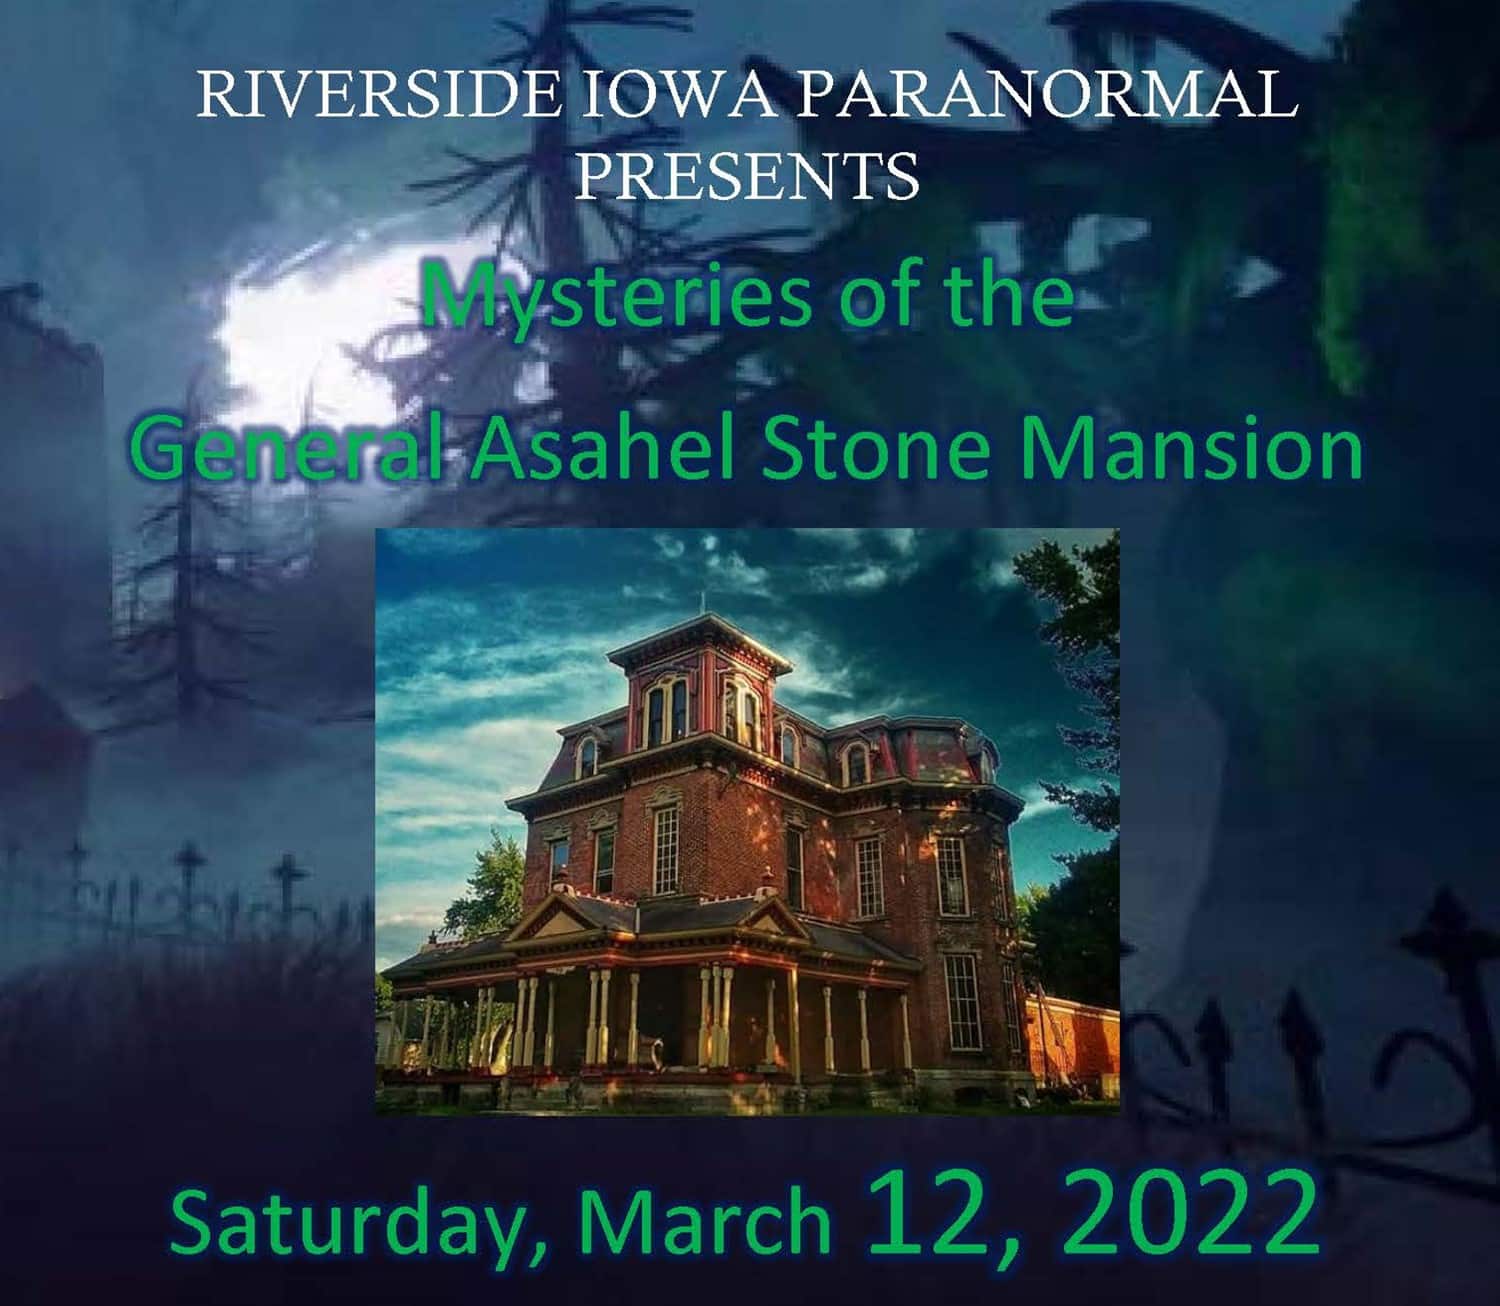 Mysteries of the General Asahel Stone Mansion